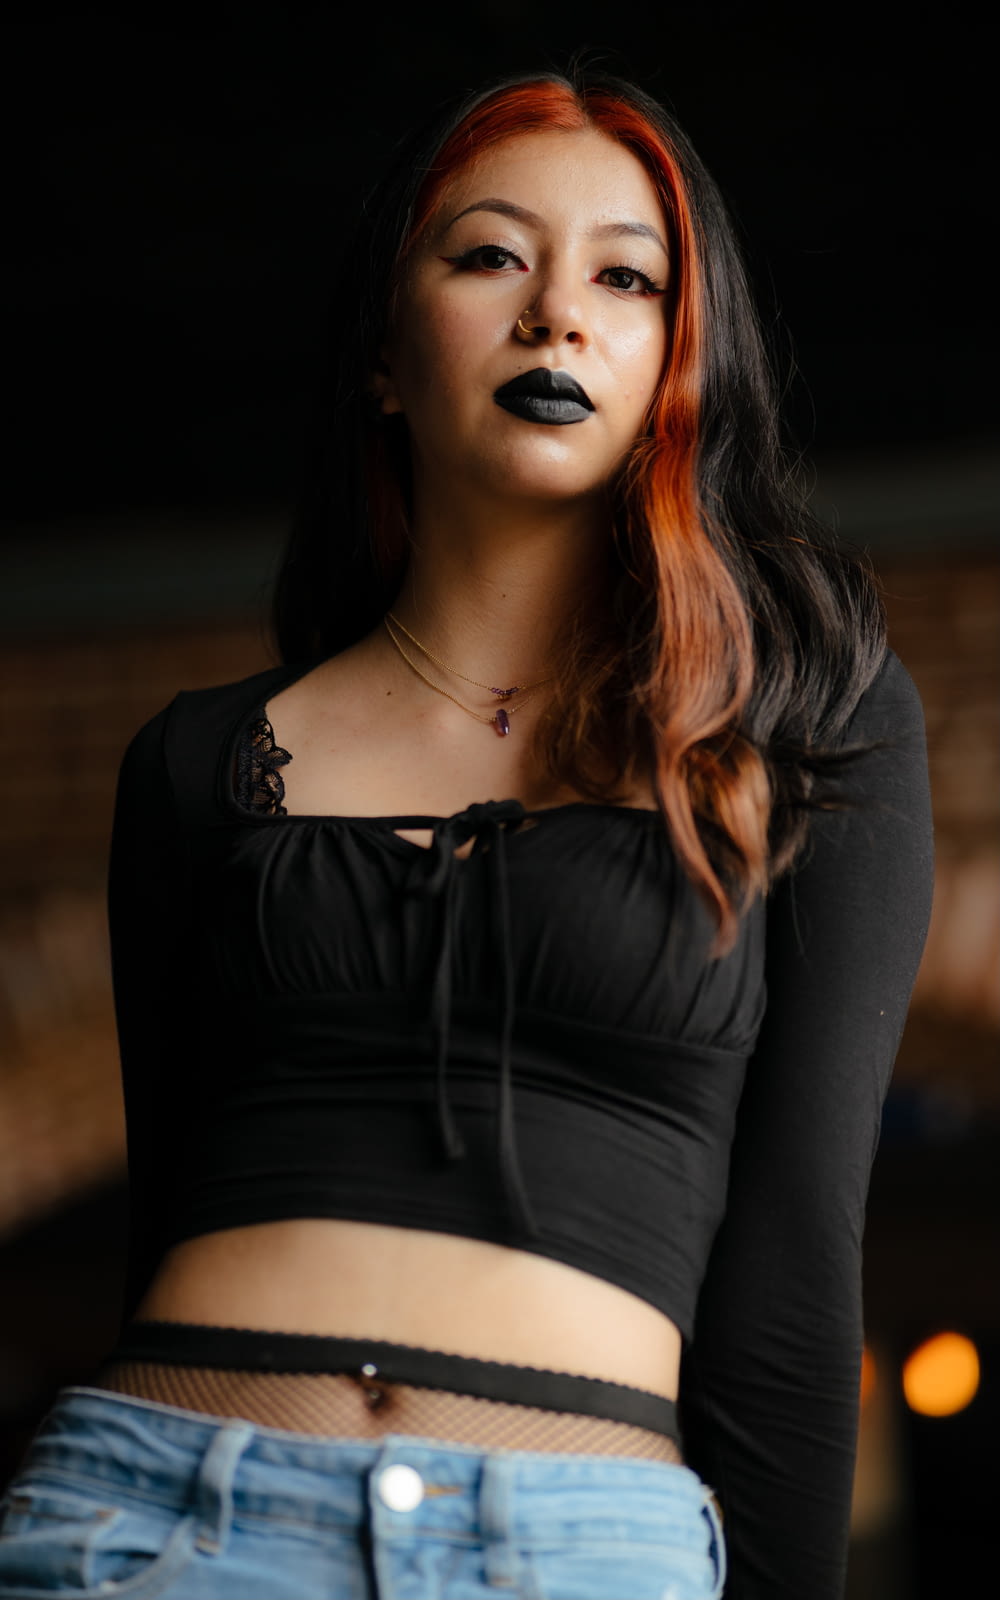 a woman with red hair and black lipstick